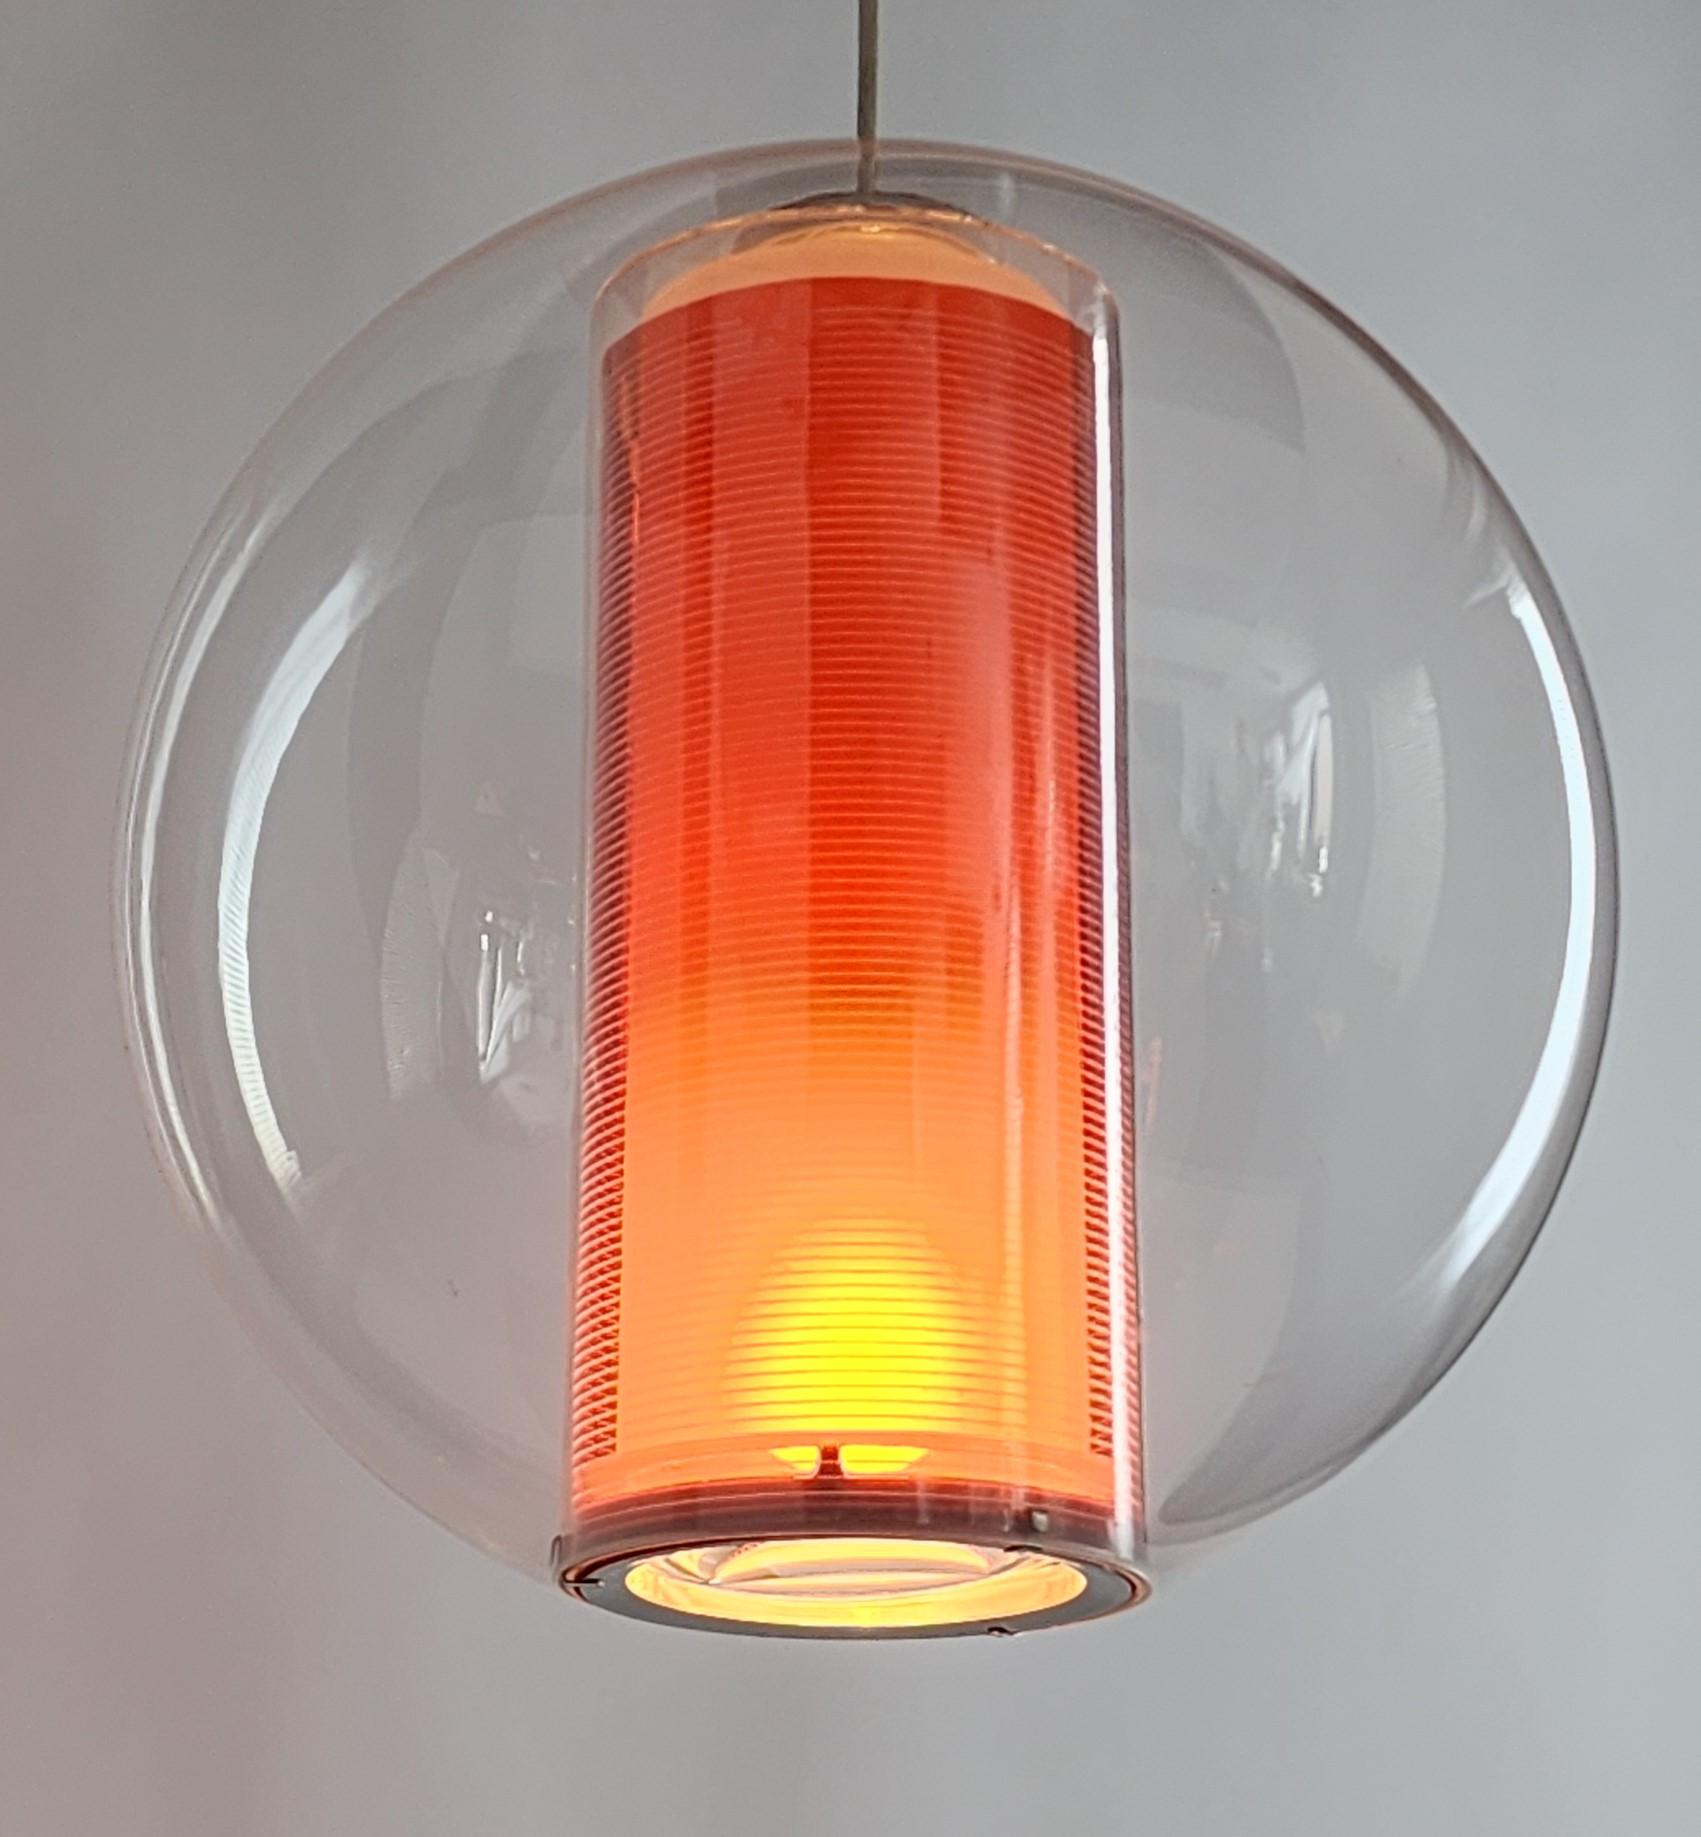 Large clear acrylic (not smoked) pendant with orange sleeve providing a warm glow. 

A convex glass diffuser narrows a ray of light under. 

Well-vented on top for heat dispersion. 

Well made with prime quality material and hardware. 

Come